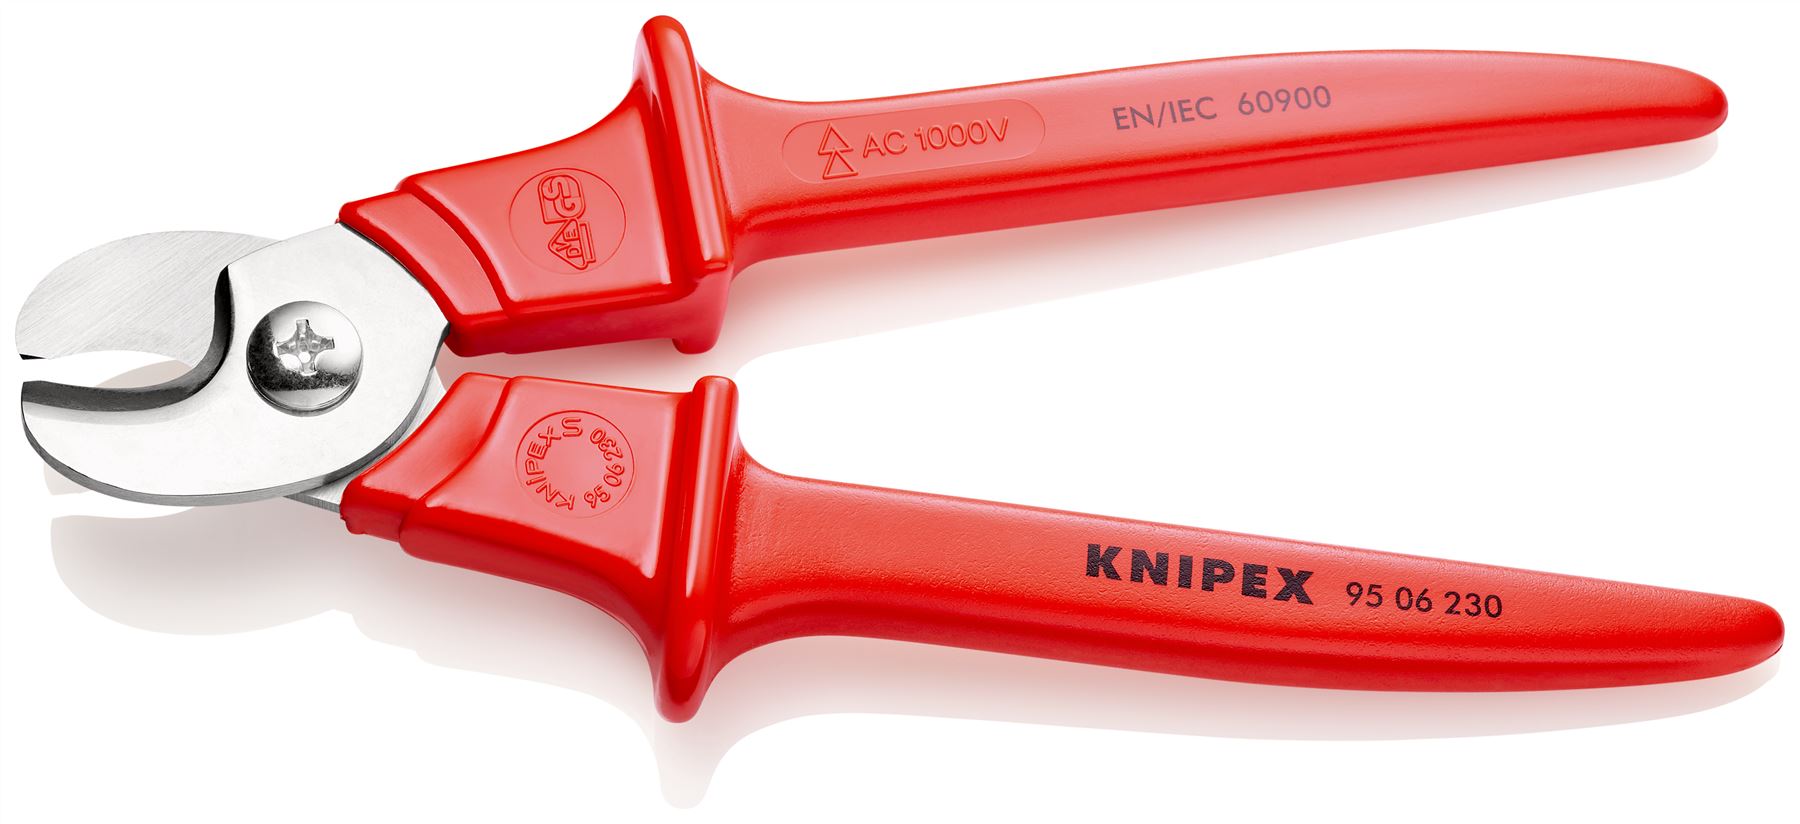 KNIPEX Cable Shears Cutters VDE Insulated Cuts Cable up to 16mm Diameter 230mm Plastic Insulated Handles 95 06 230